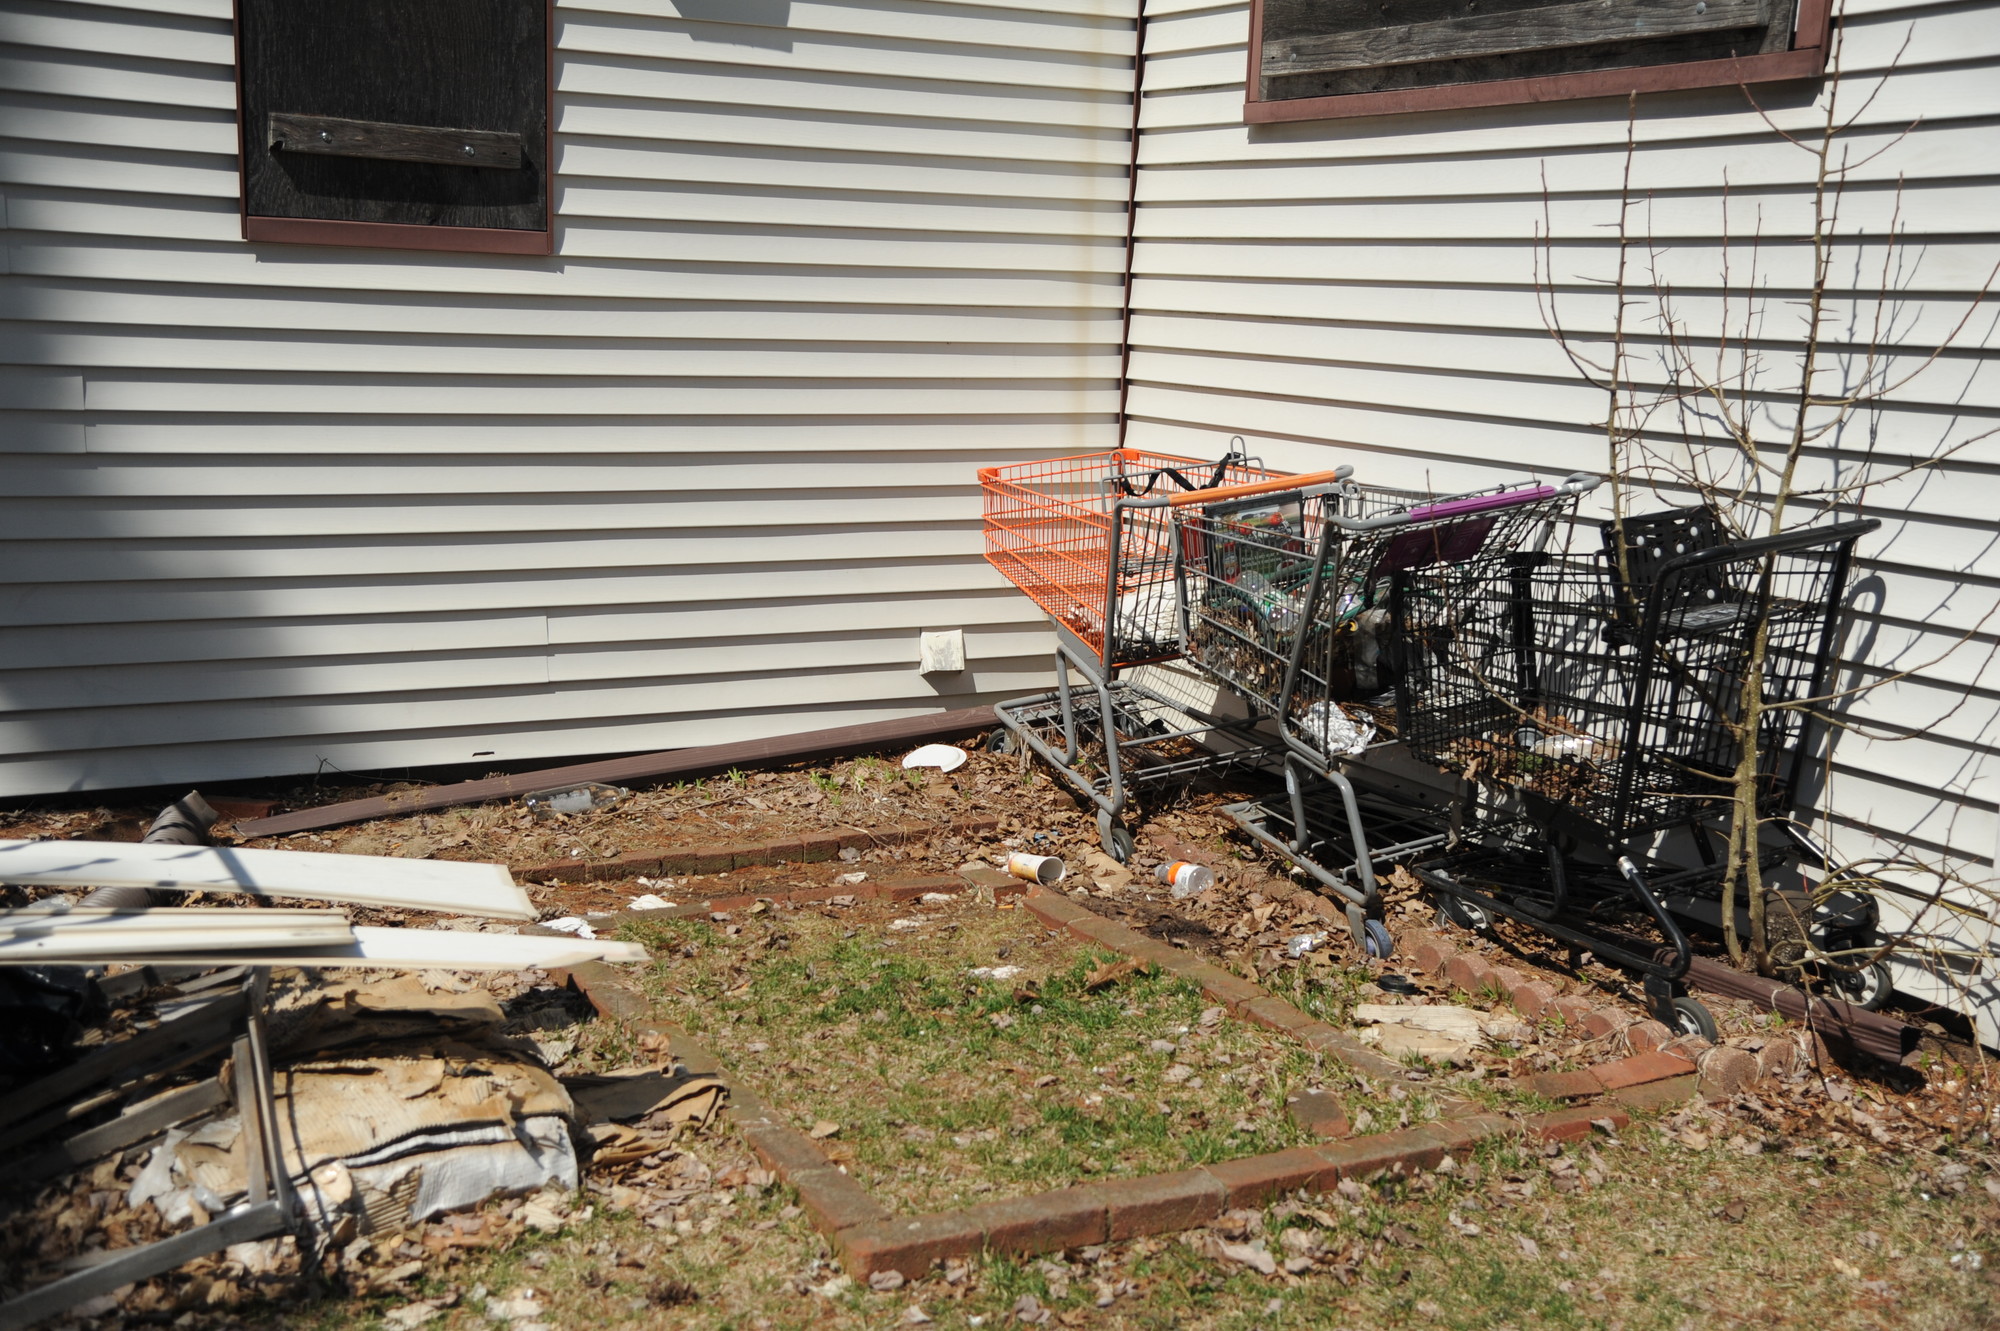 The prevalence of shopping carts has led many to suspect that squatters may occupy the abandoned house.